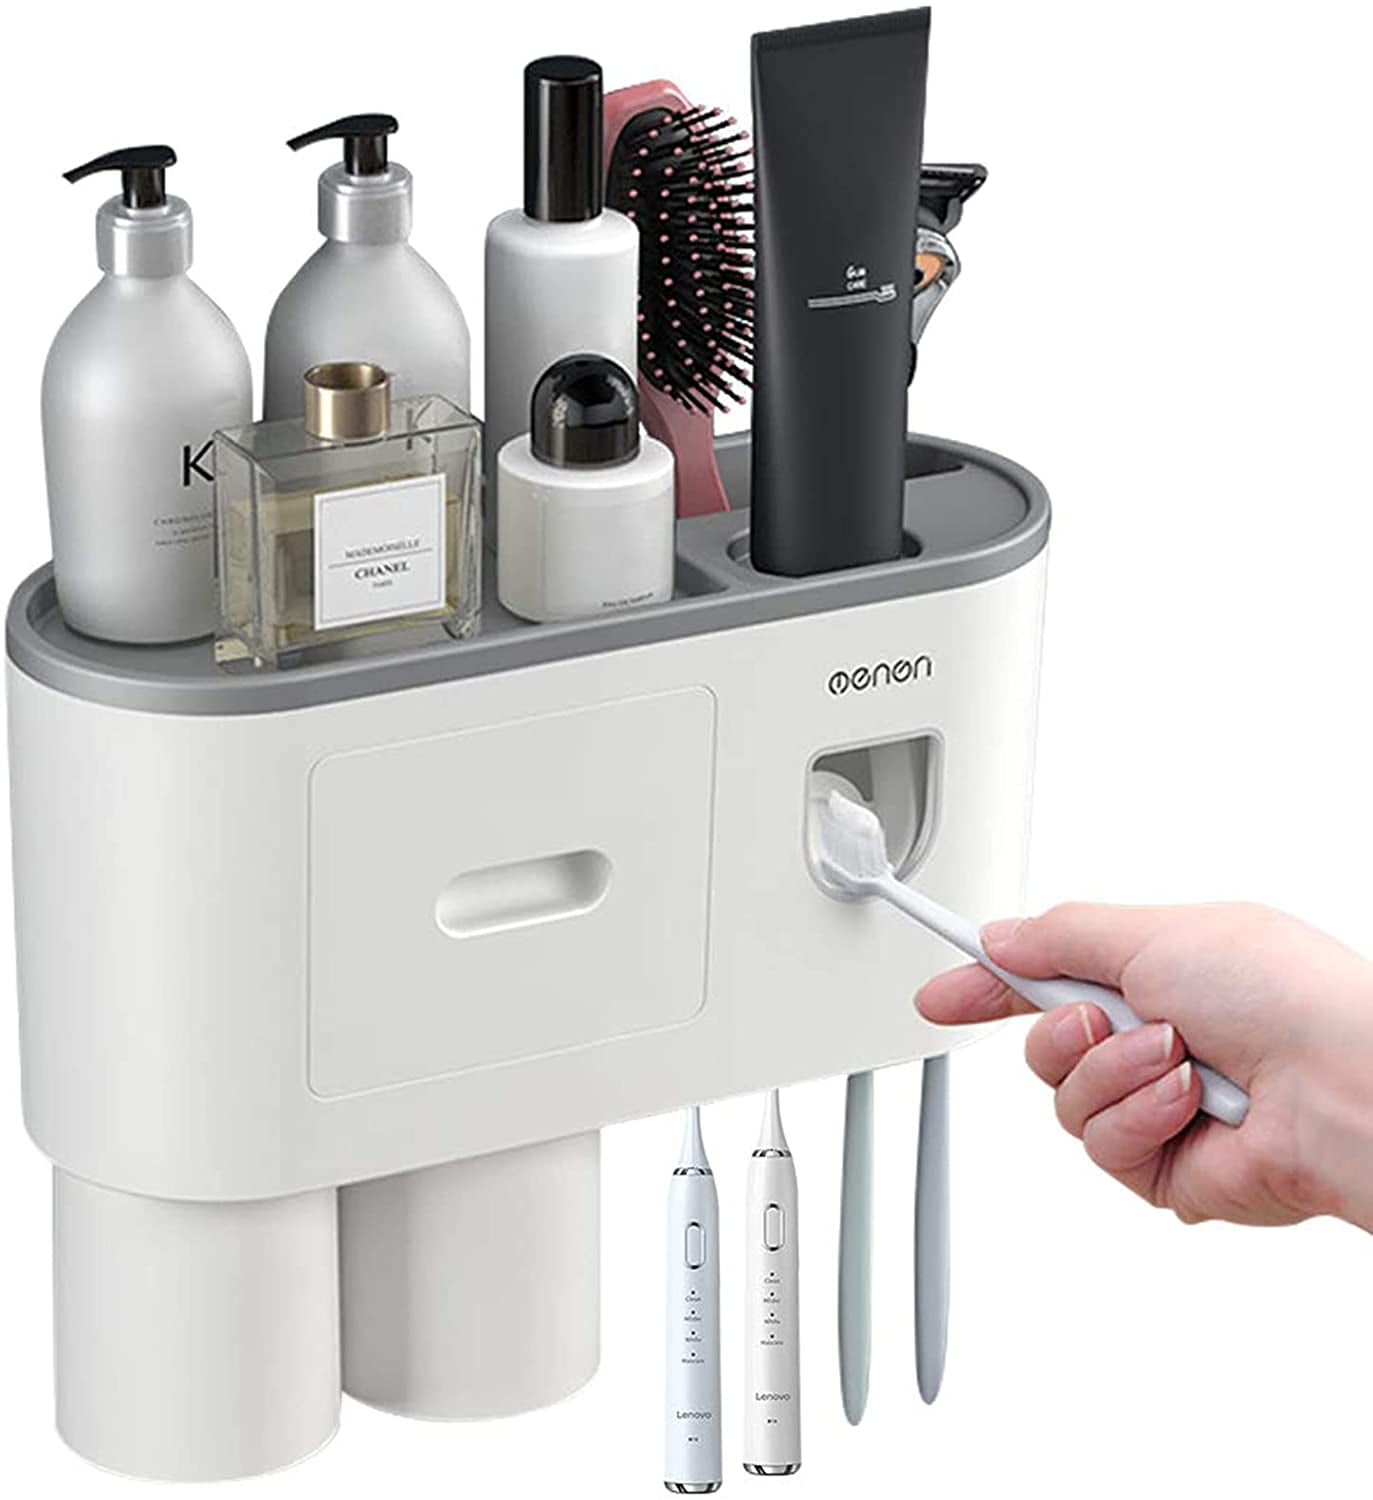 Stainless Steel Wall Mount Toothpaste Dispenser 2/3 Positions Toothbrush Holder